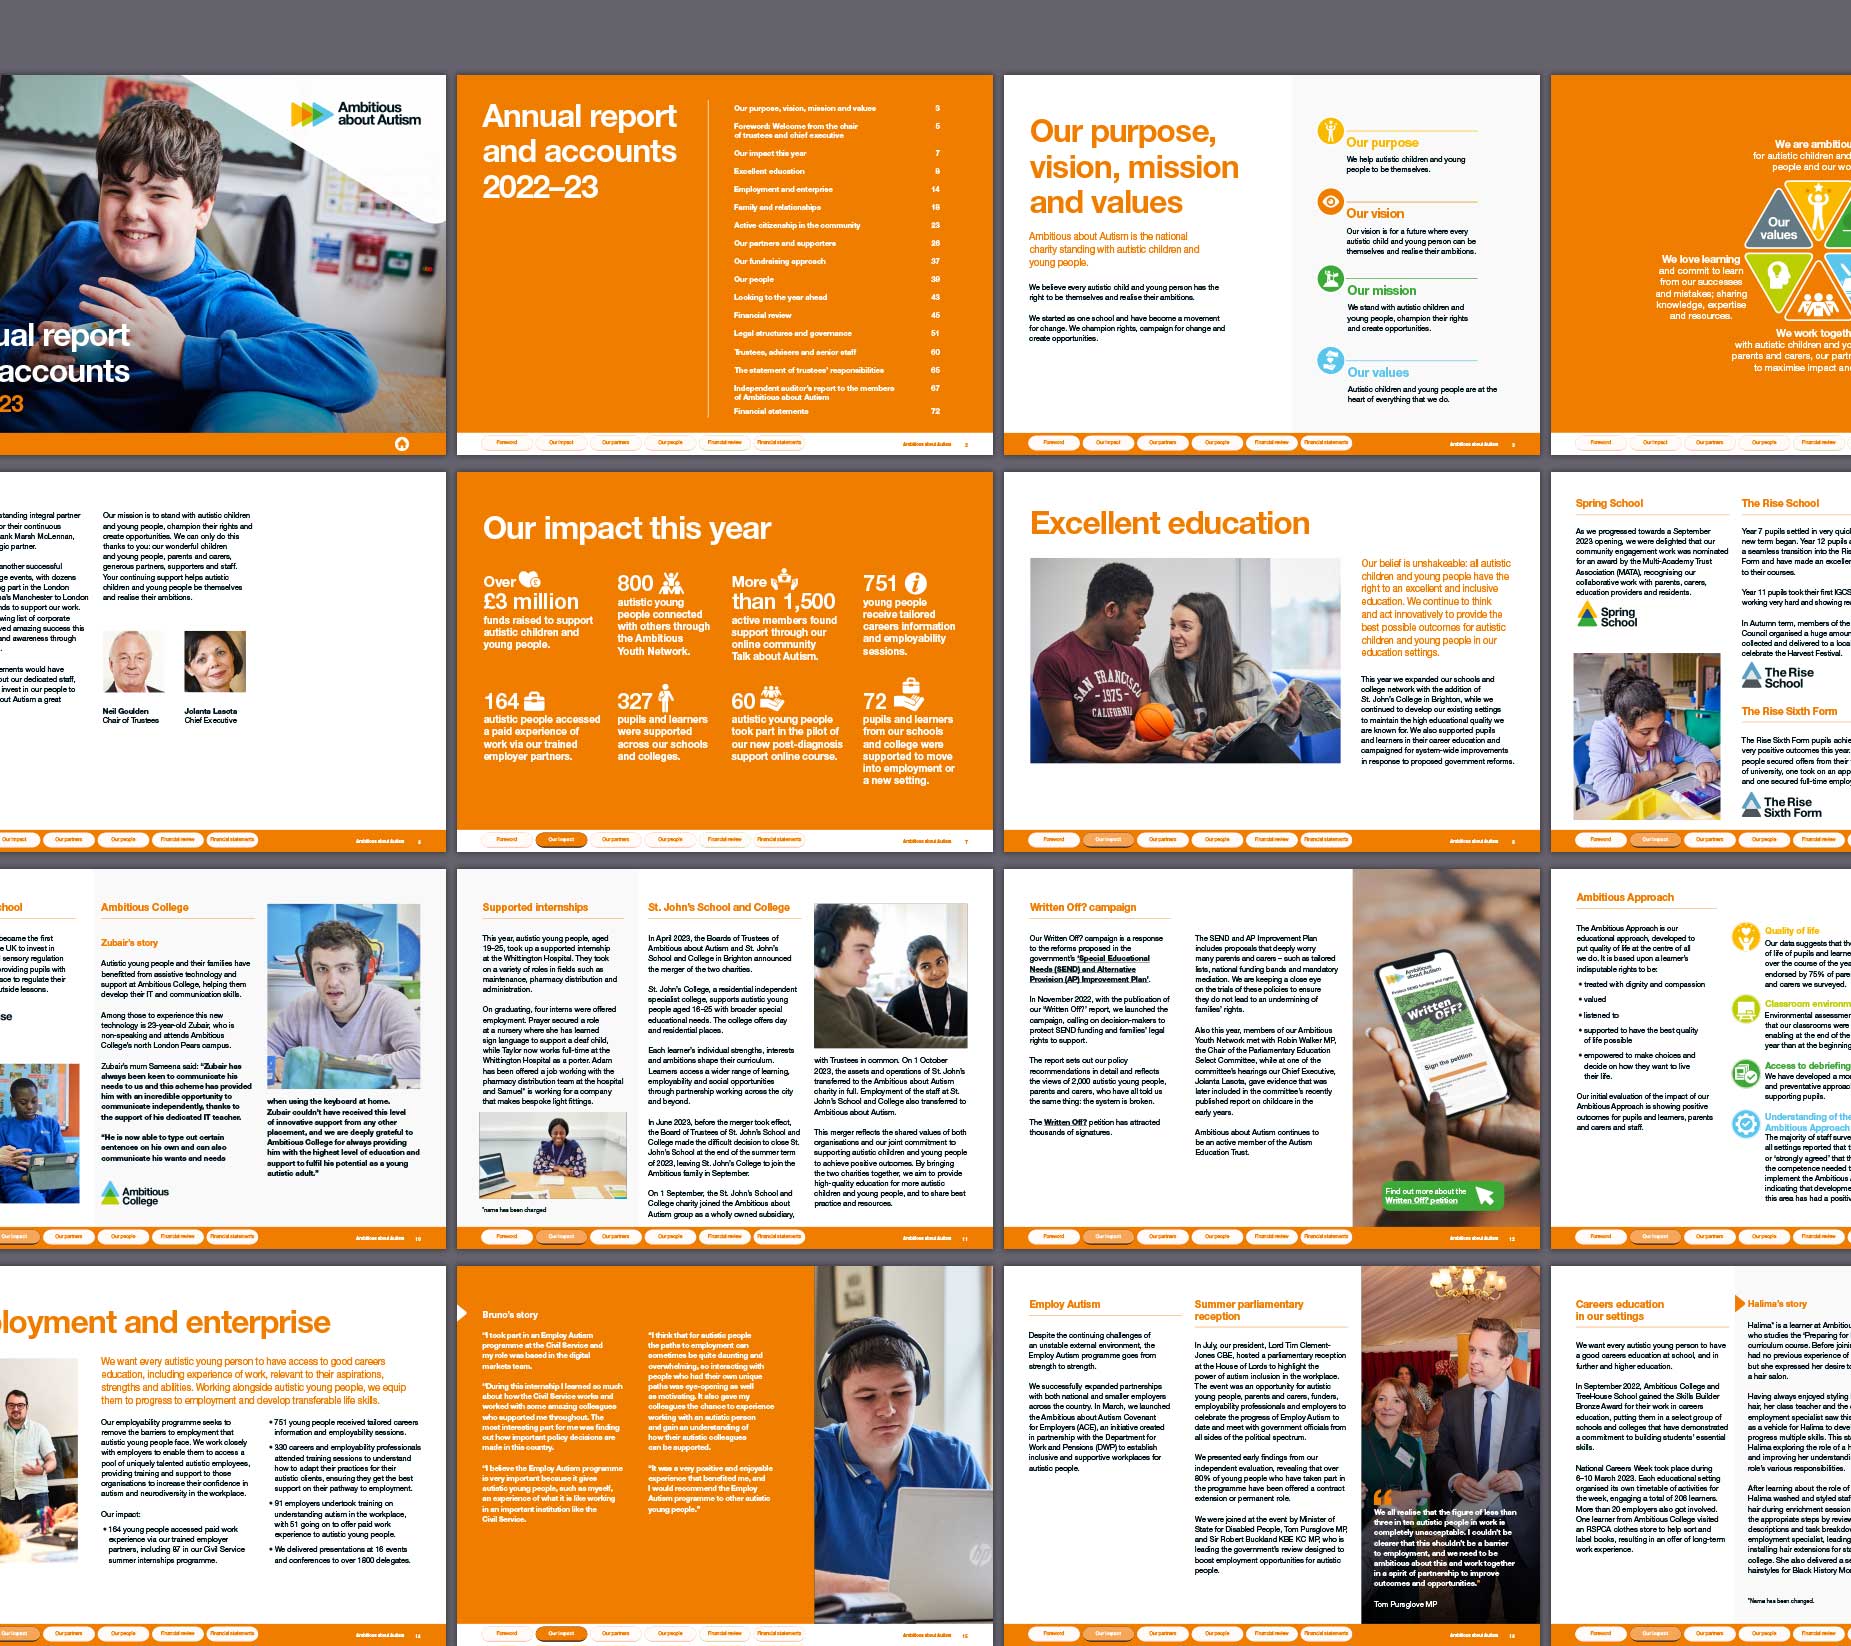 Ambitions about autism - annual report and accounts 2022-23